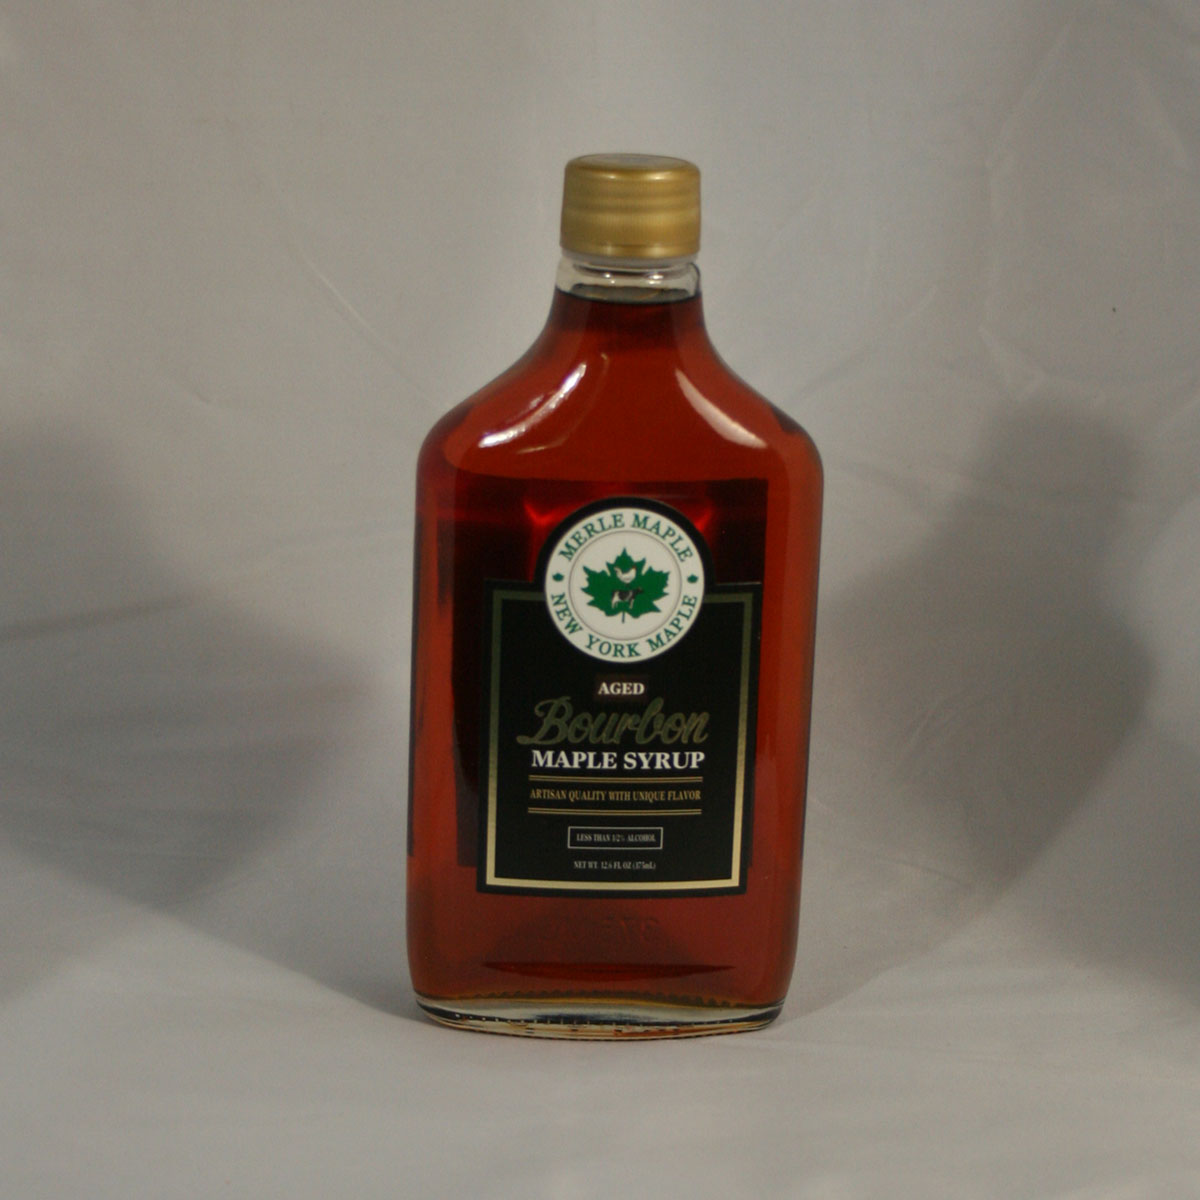 Aged Bourbon Maple Syrup in 250ml